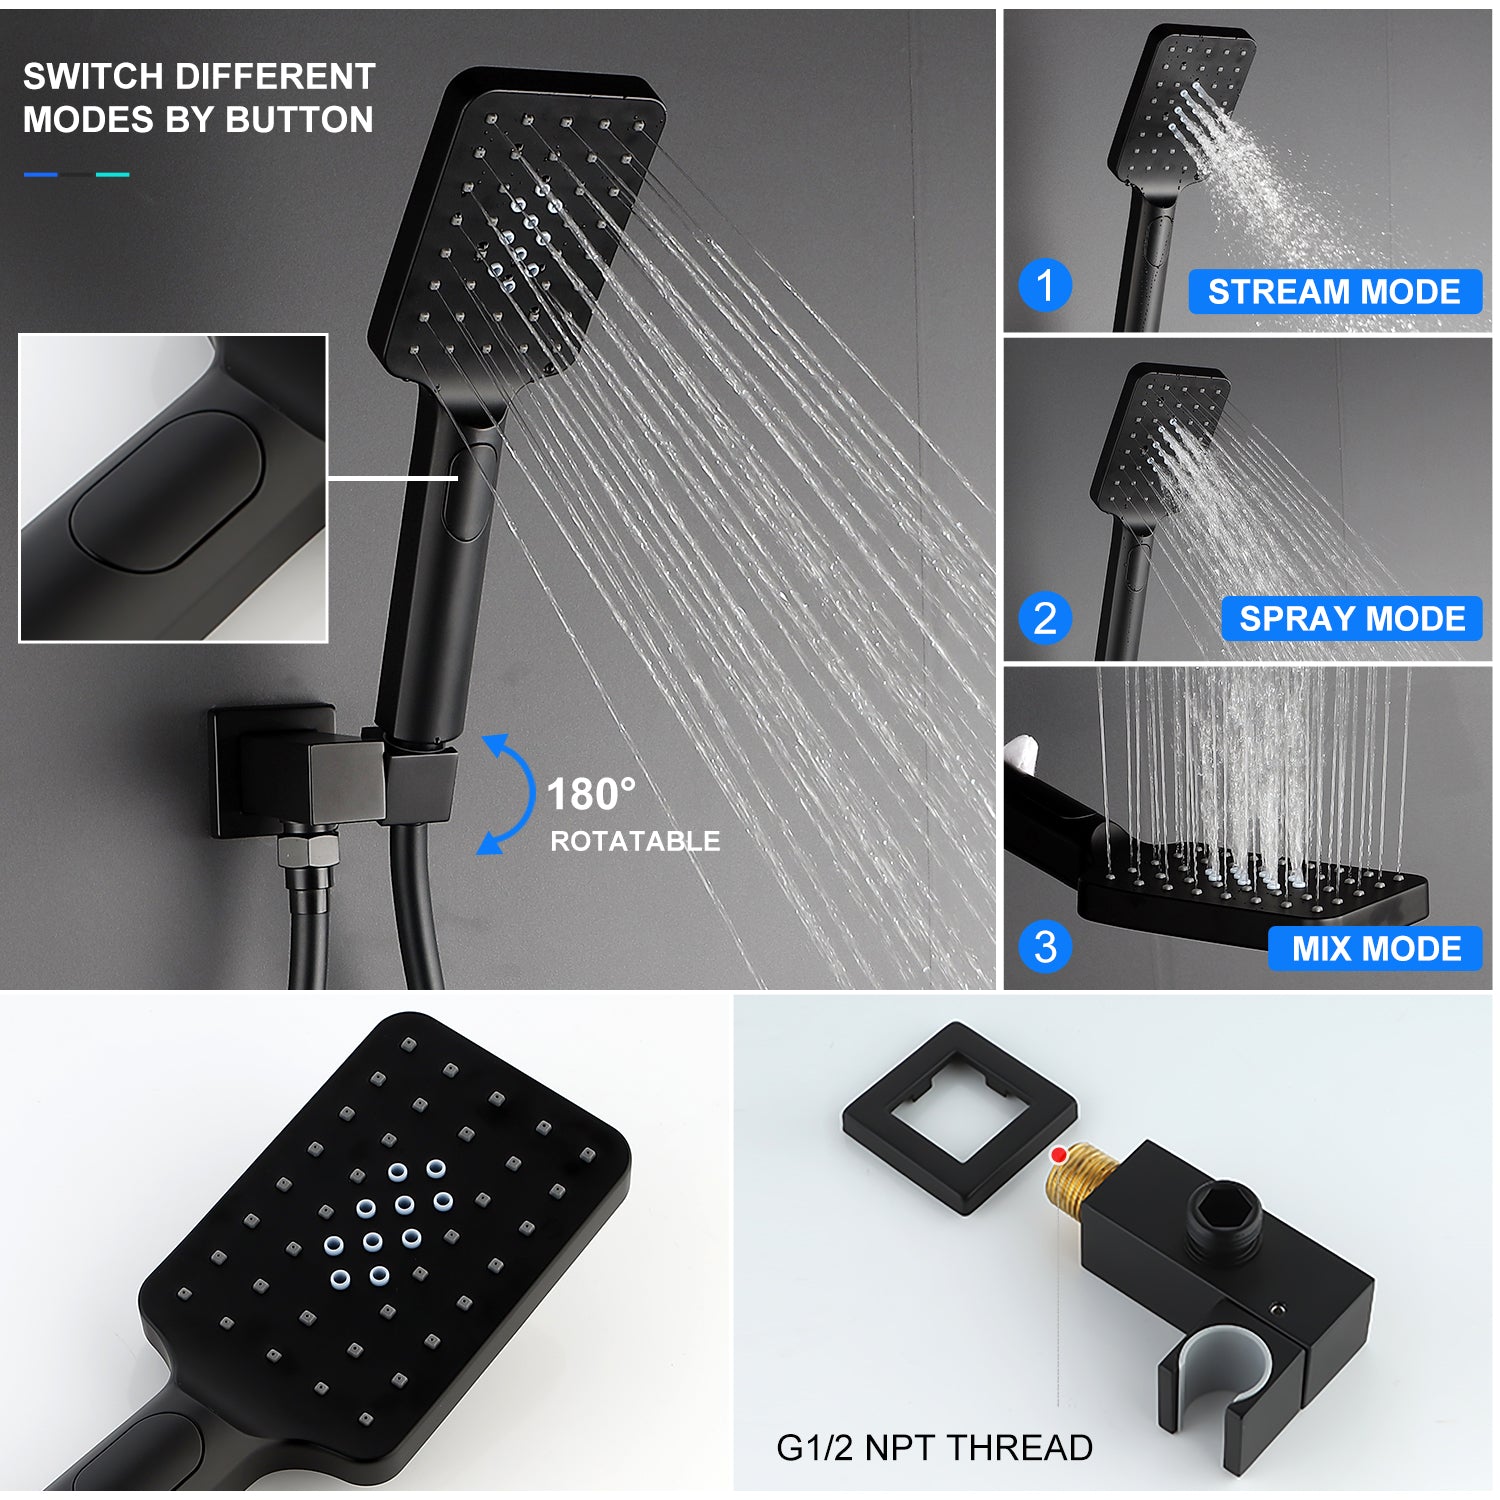 12" Shower Head 2-way Wall-Mount Square Shower Faucet with Rough in-Valve RX97202-12